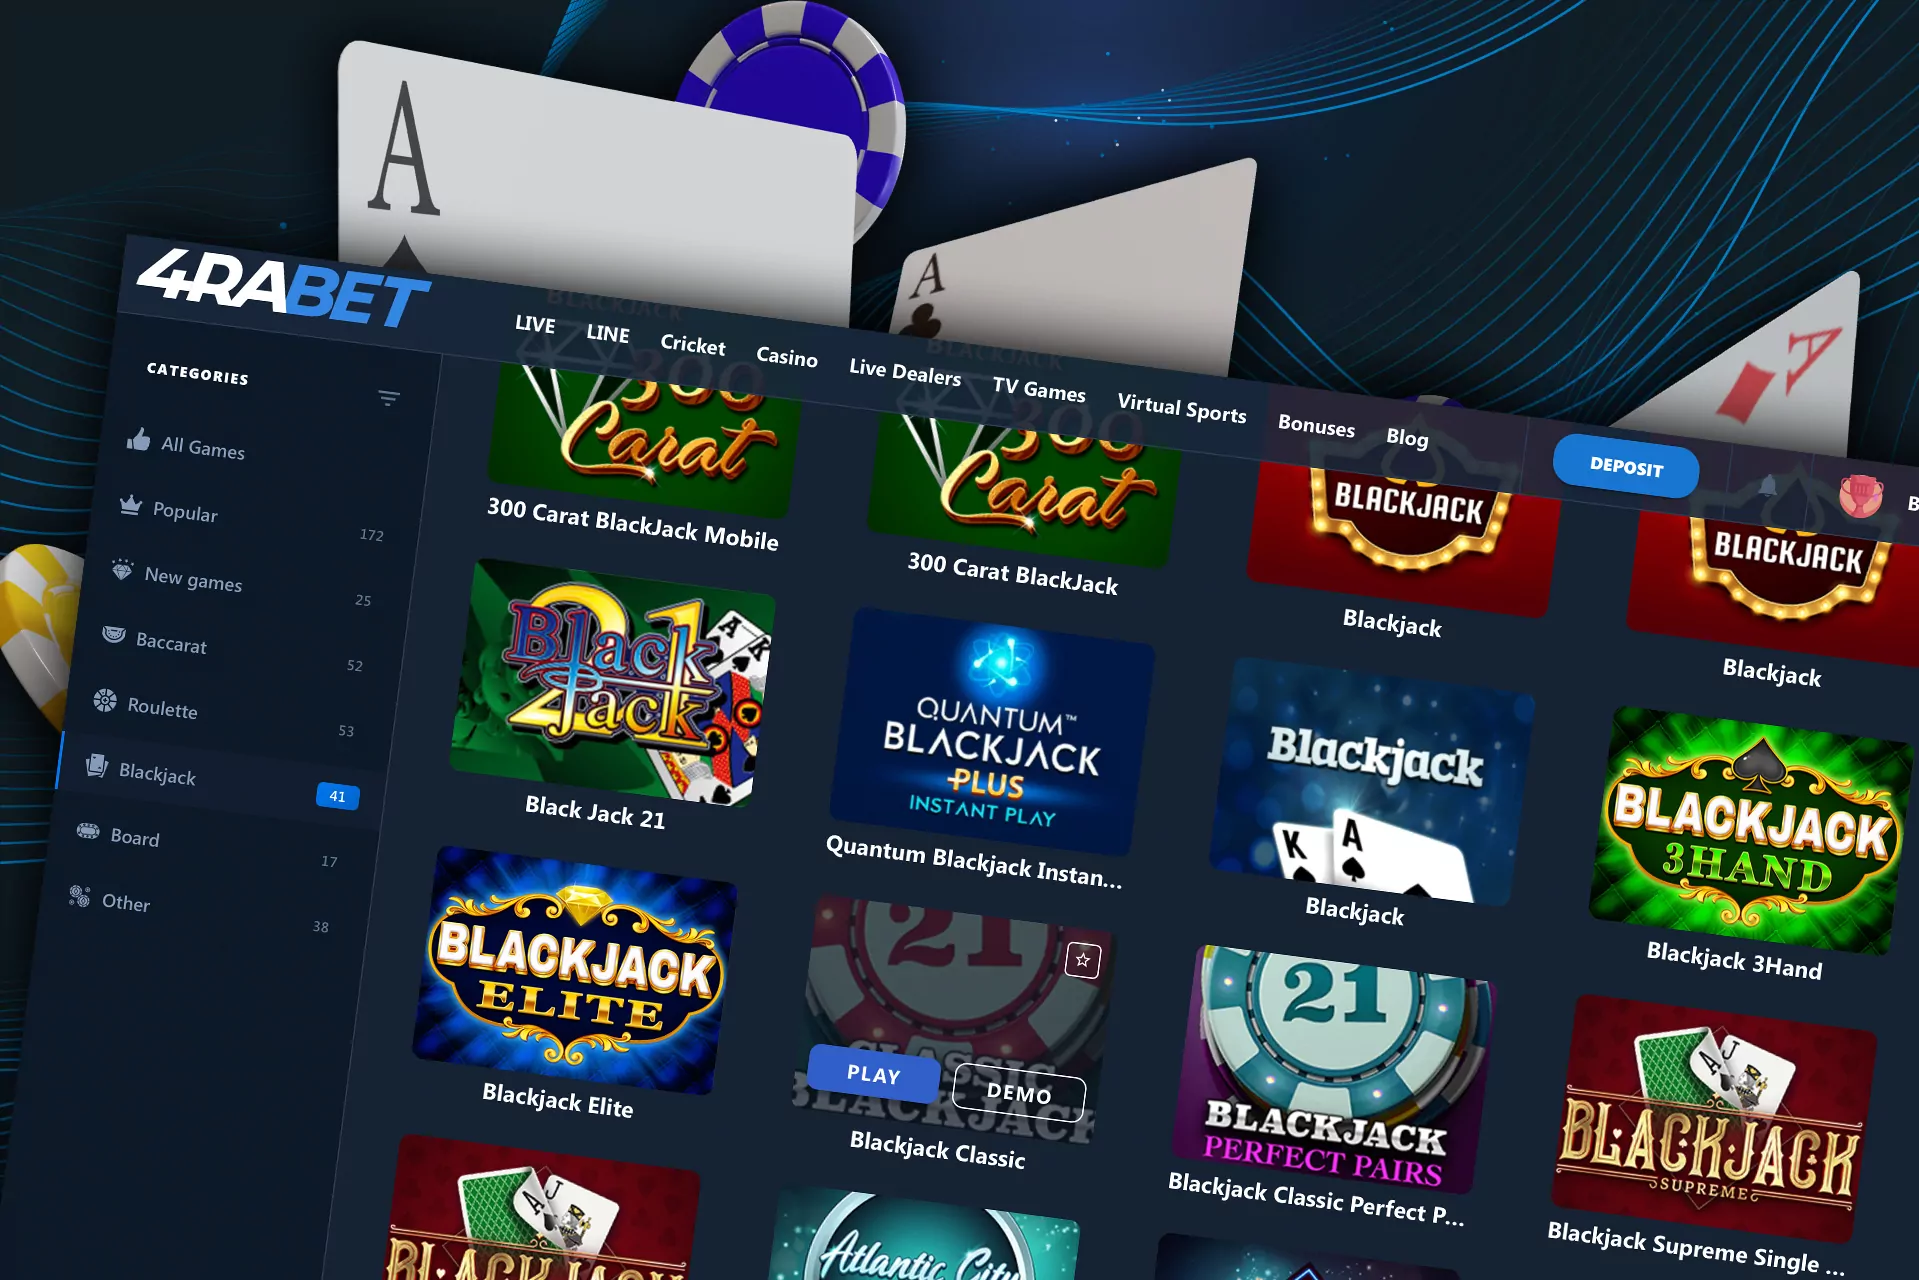 41 different games in the blackjack section.